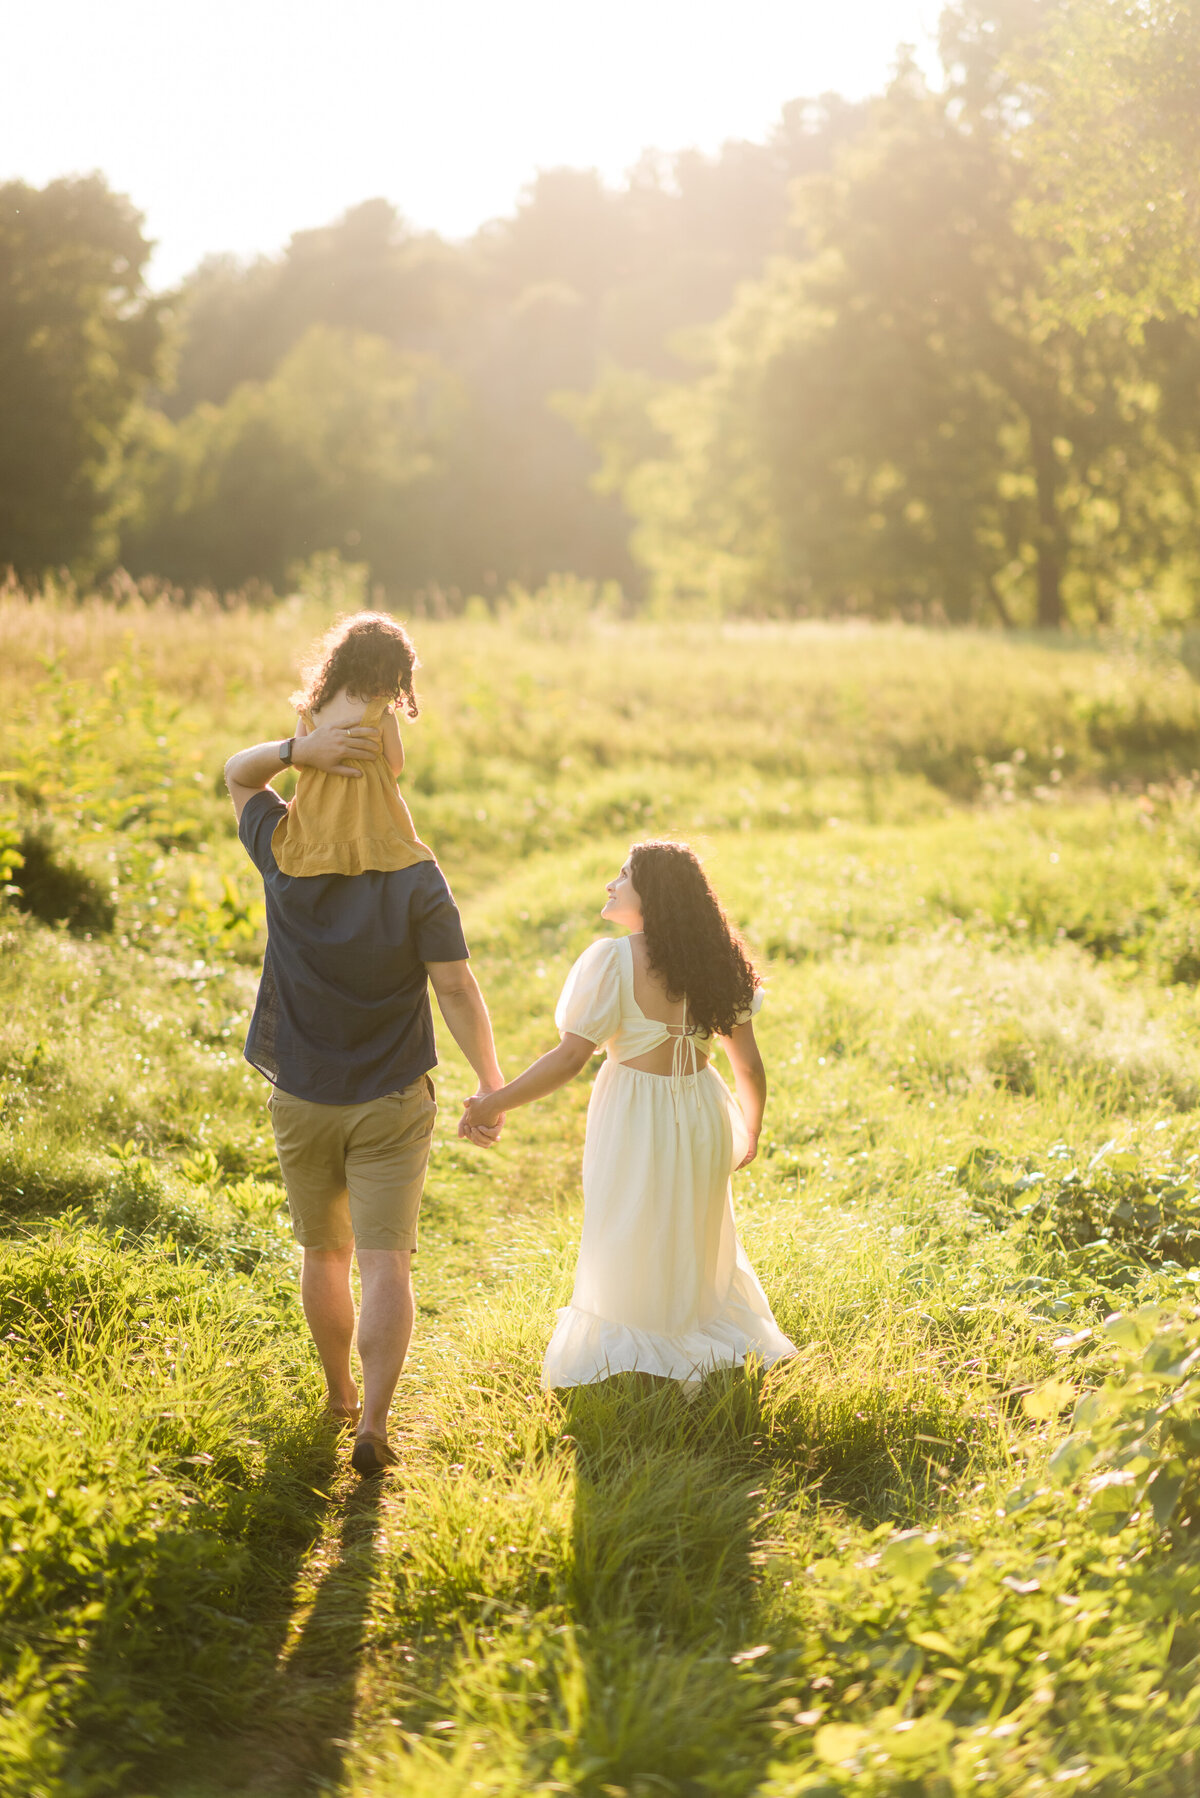 Boston-family-photographer-bella-wang-photography-Lifestyle-session-outdoor-wildflower-28